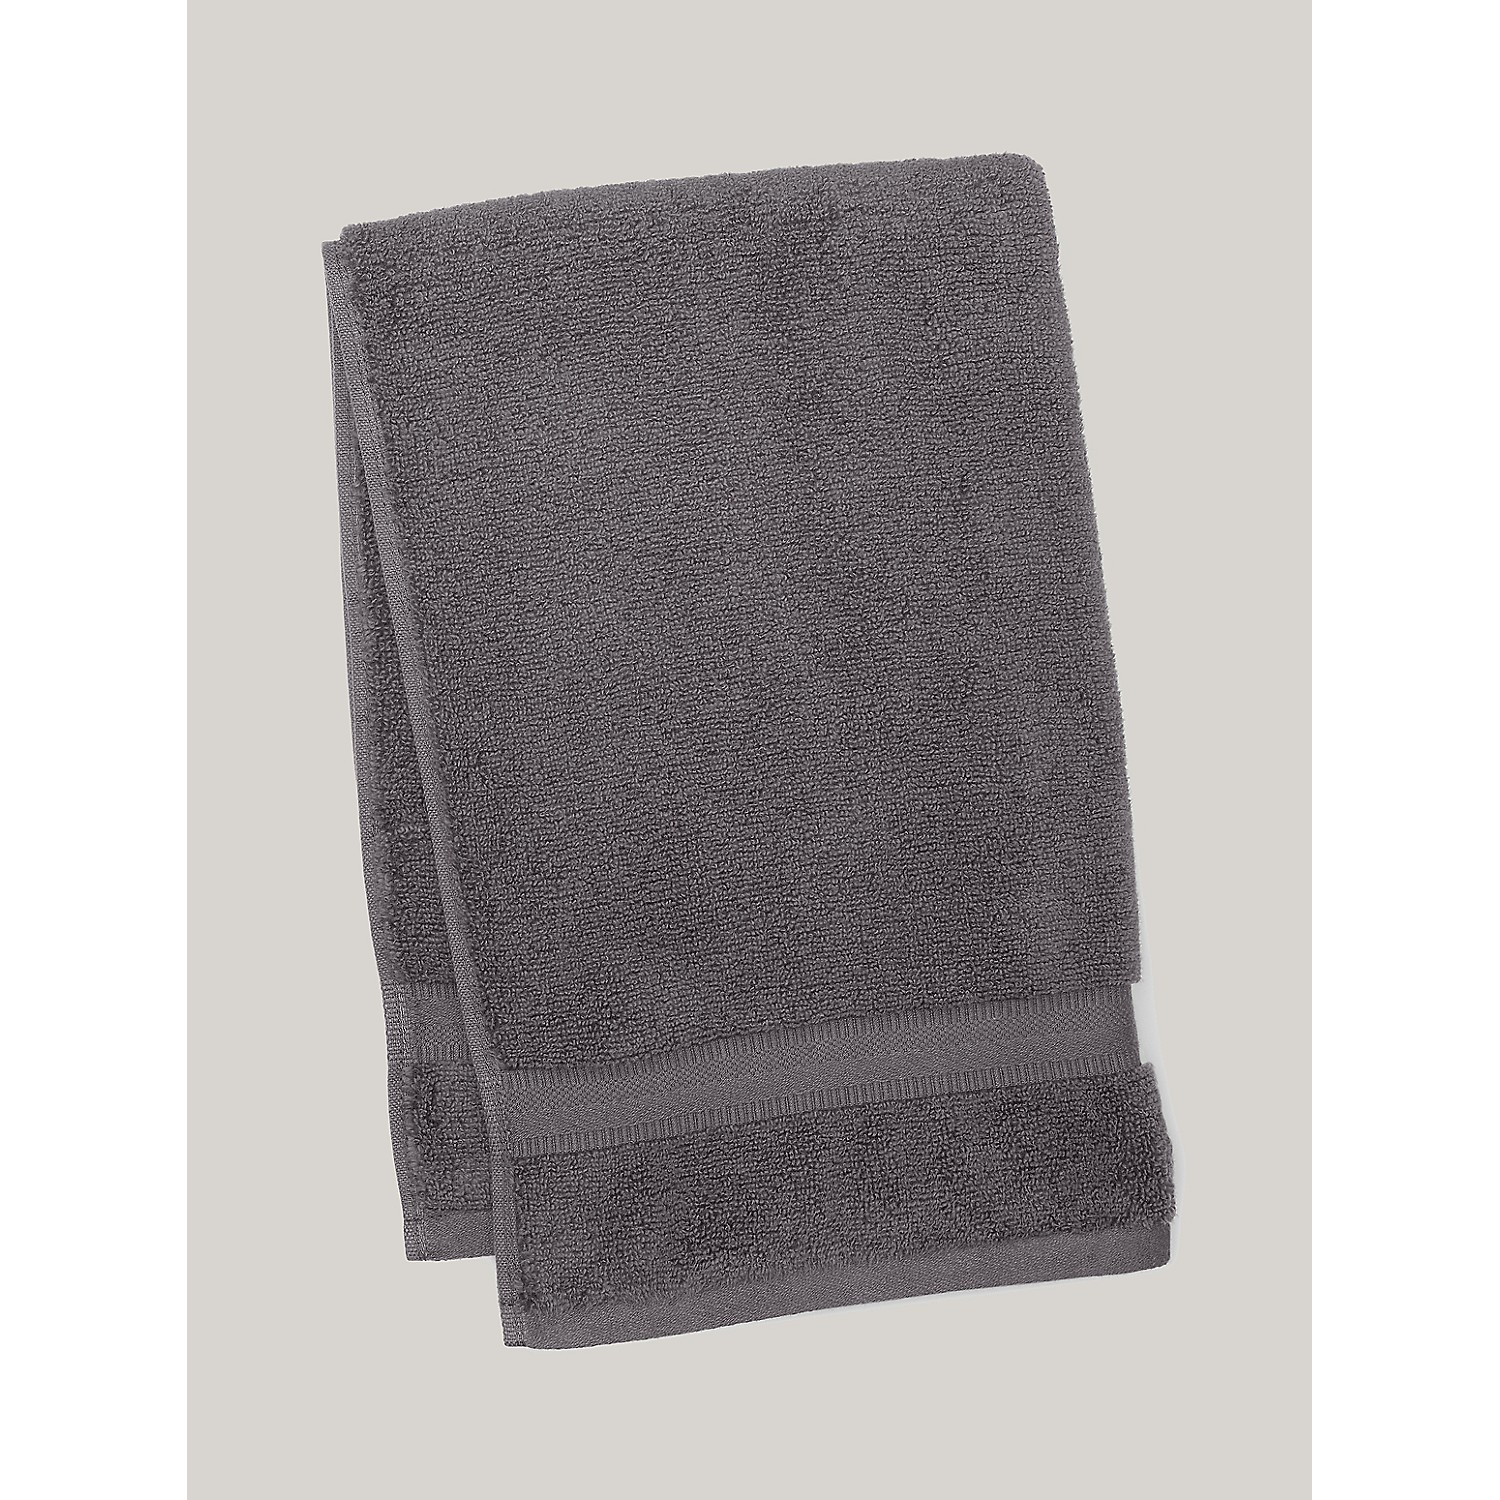 TOMMY HILFIGER Signature Solid Hand Towel in Dark Gray